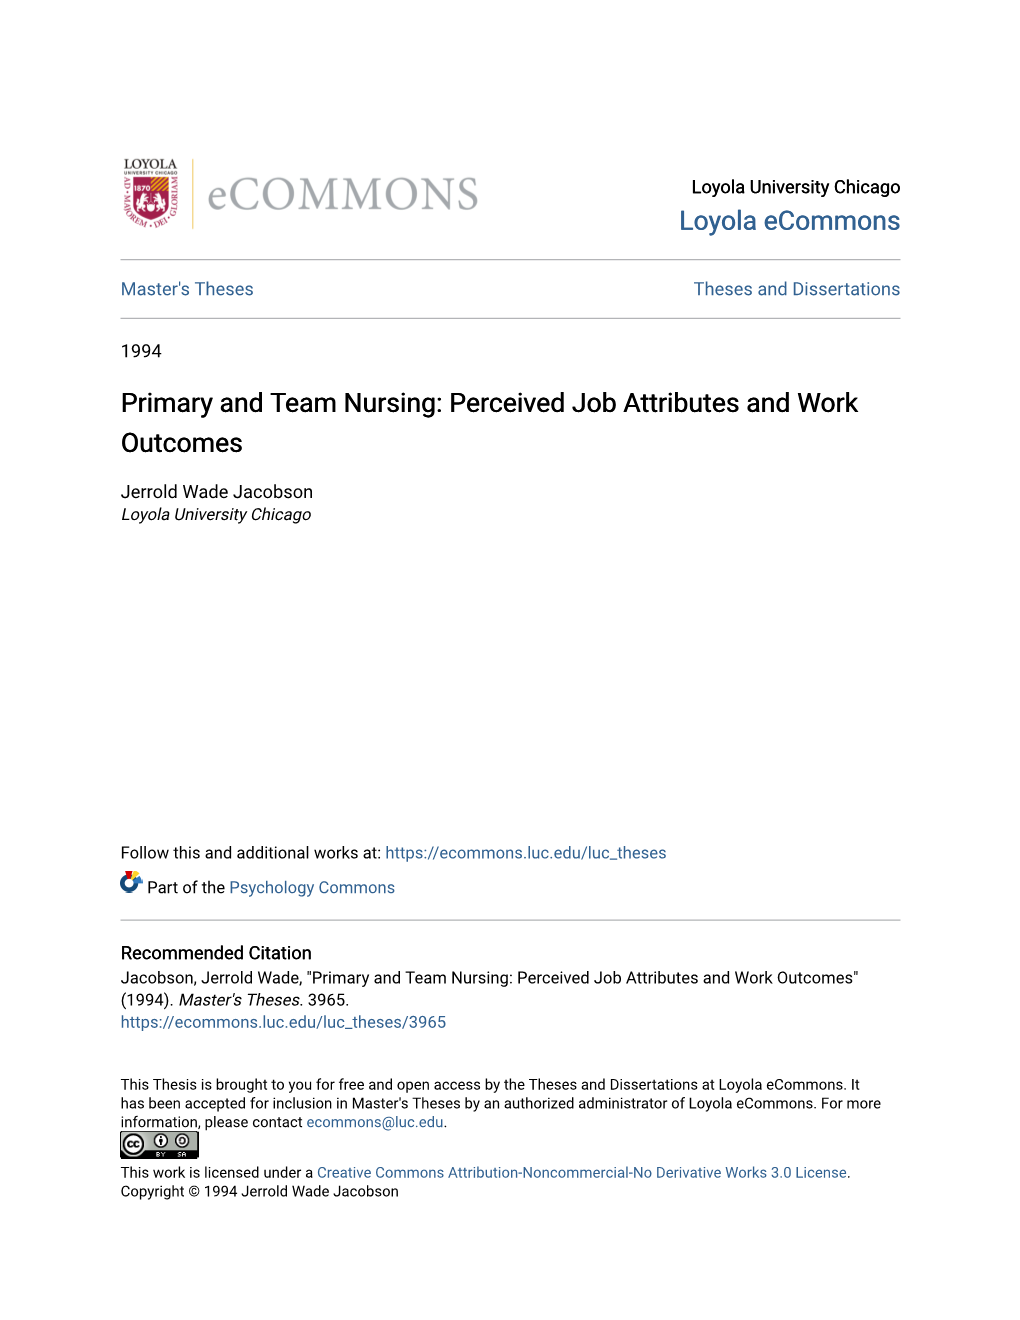 Primary and Team Nursing: Perceived Job Attributes and Work Outcomes